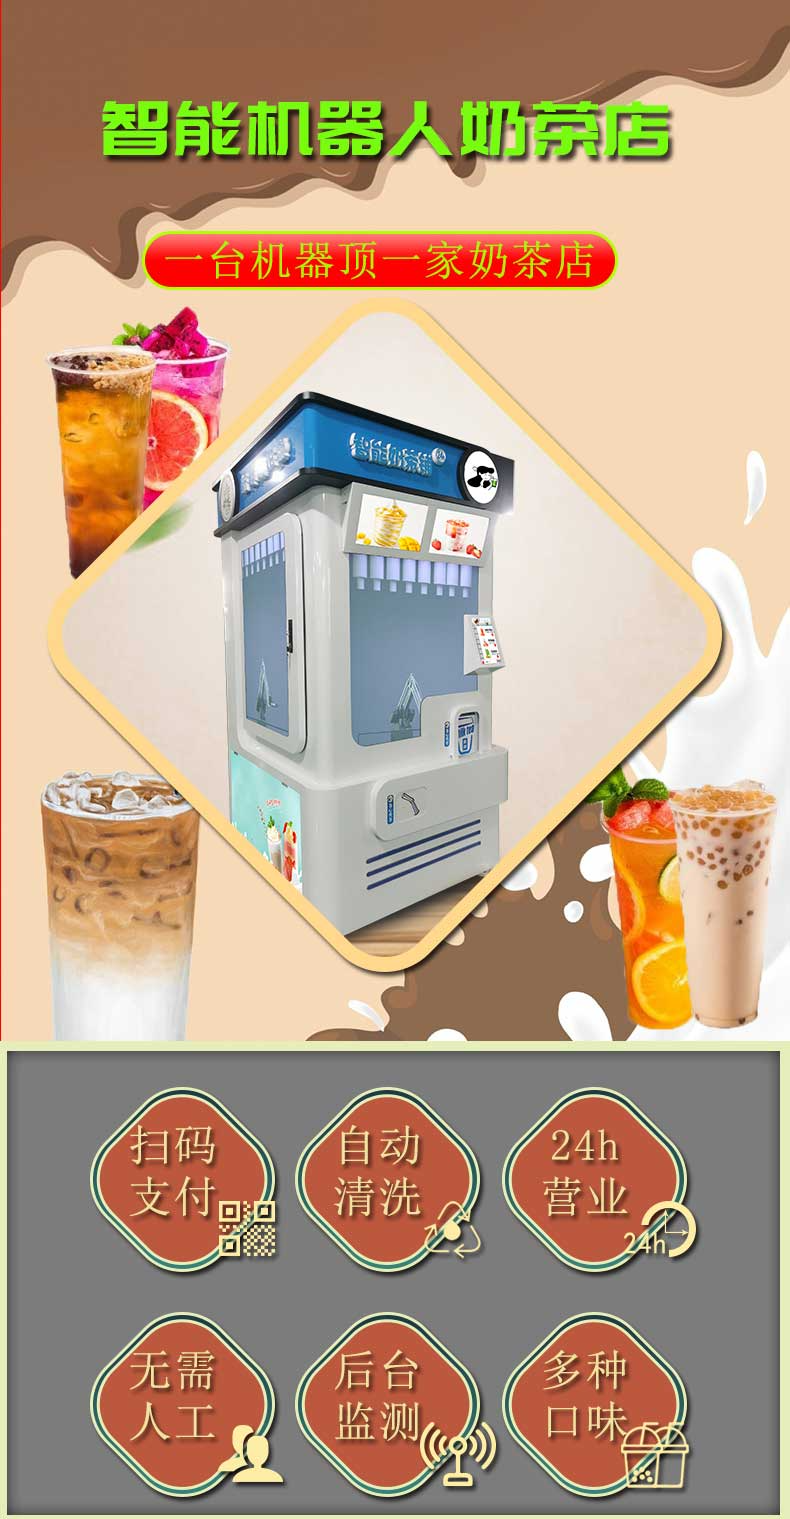 Enteng fully automated commercial all-in-one machine Unmanned fruit juice cold drink coffee vending machine in shopping malls and scenic areas